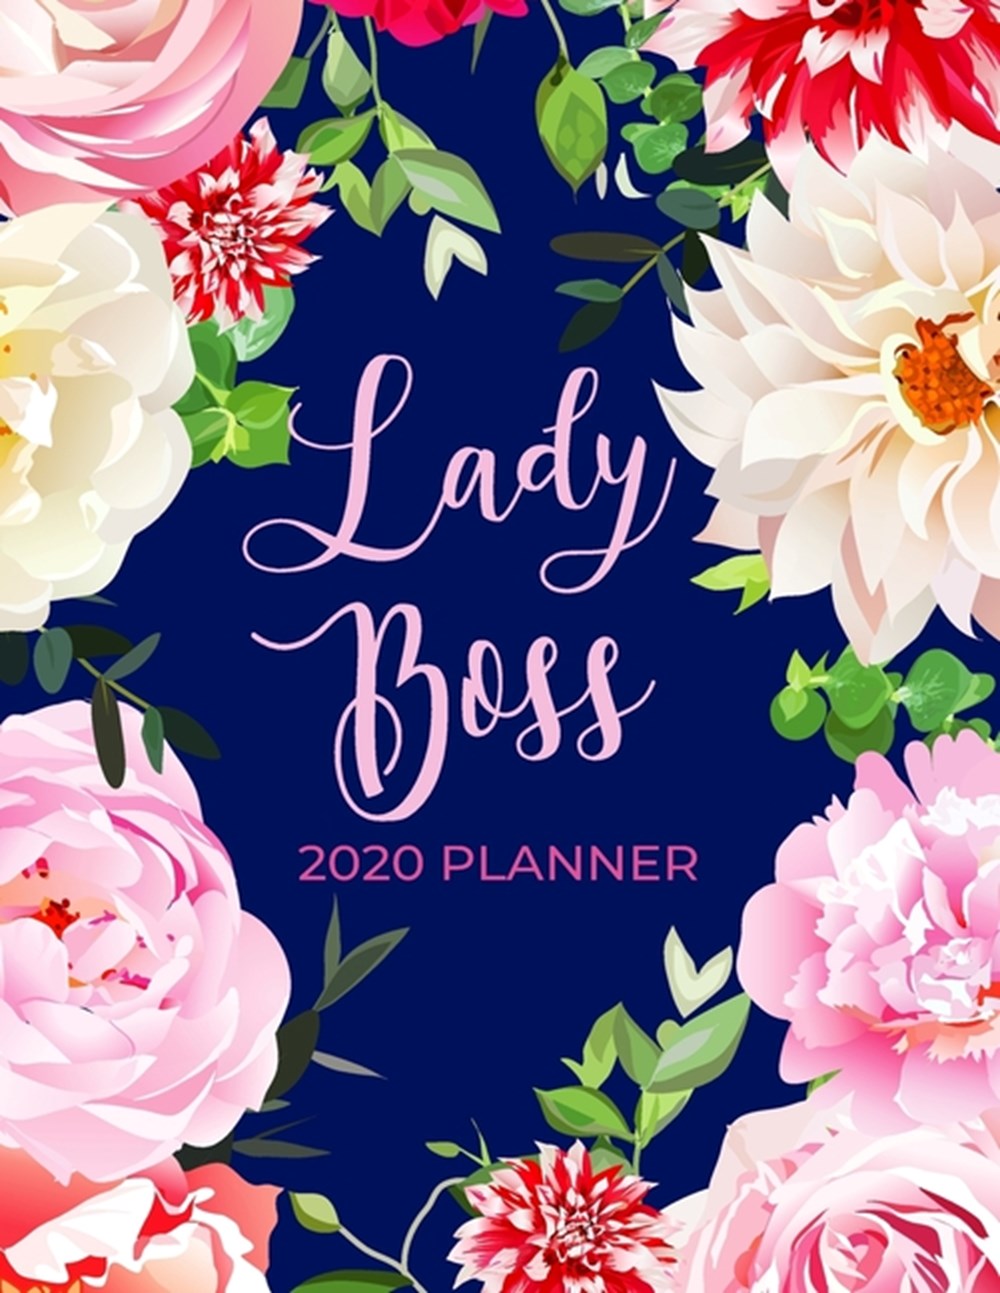 Lady Boss 2020 Planner - Weekly Organizer, Calendar & Agenda with Space to Write Notes, Pretty Flora